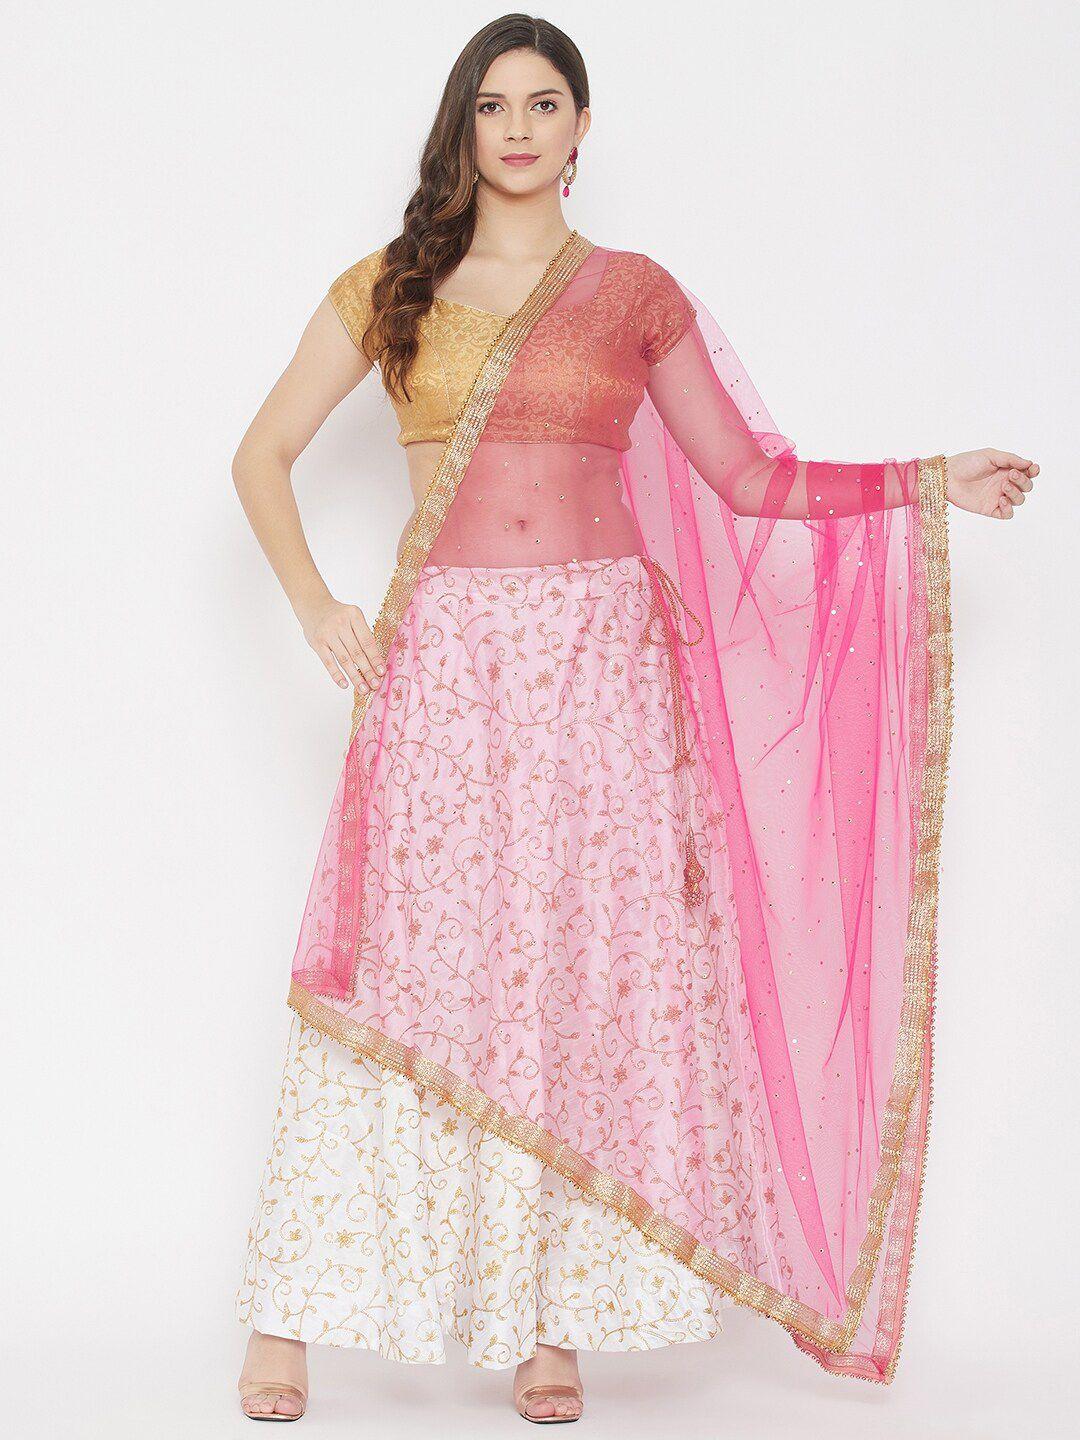 clora-creation-pink-&-gold-toned-ethnic-motifs-embroidered-net-dupatta-with-beads-&-stones